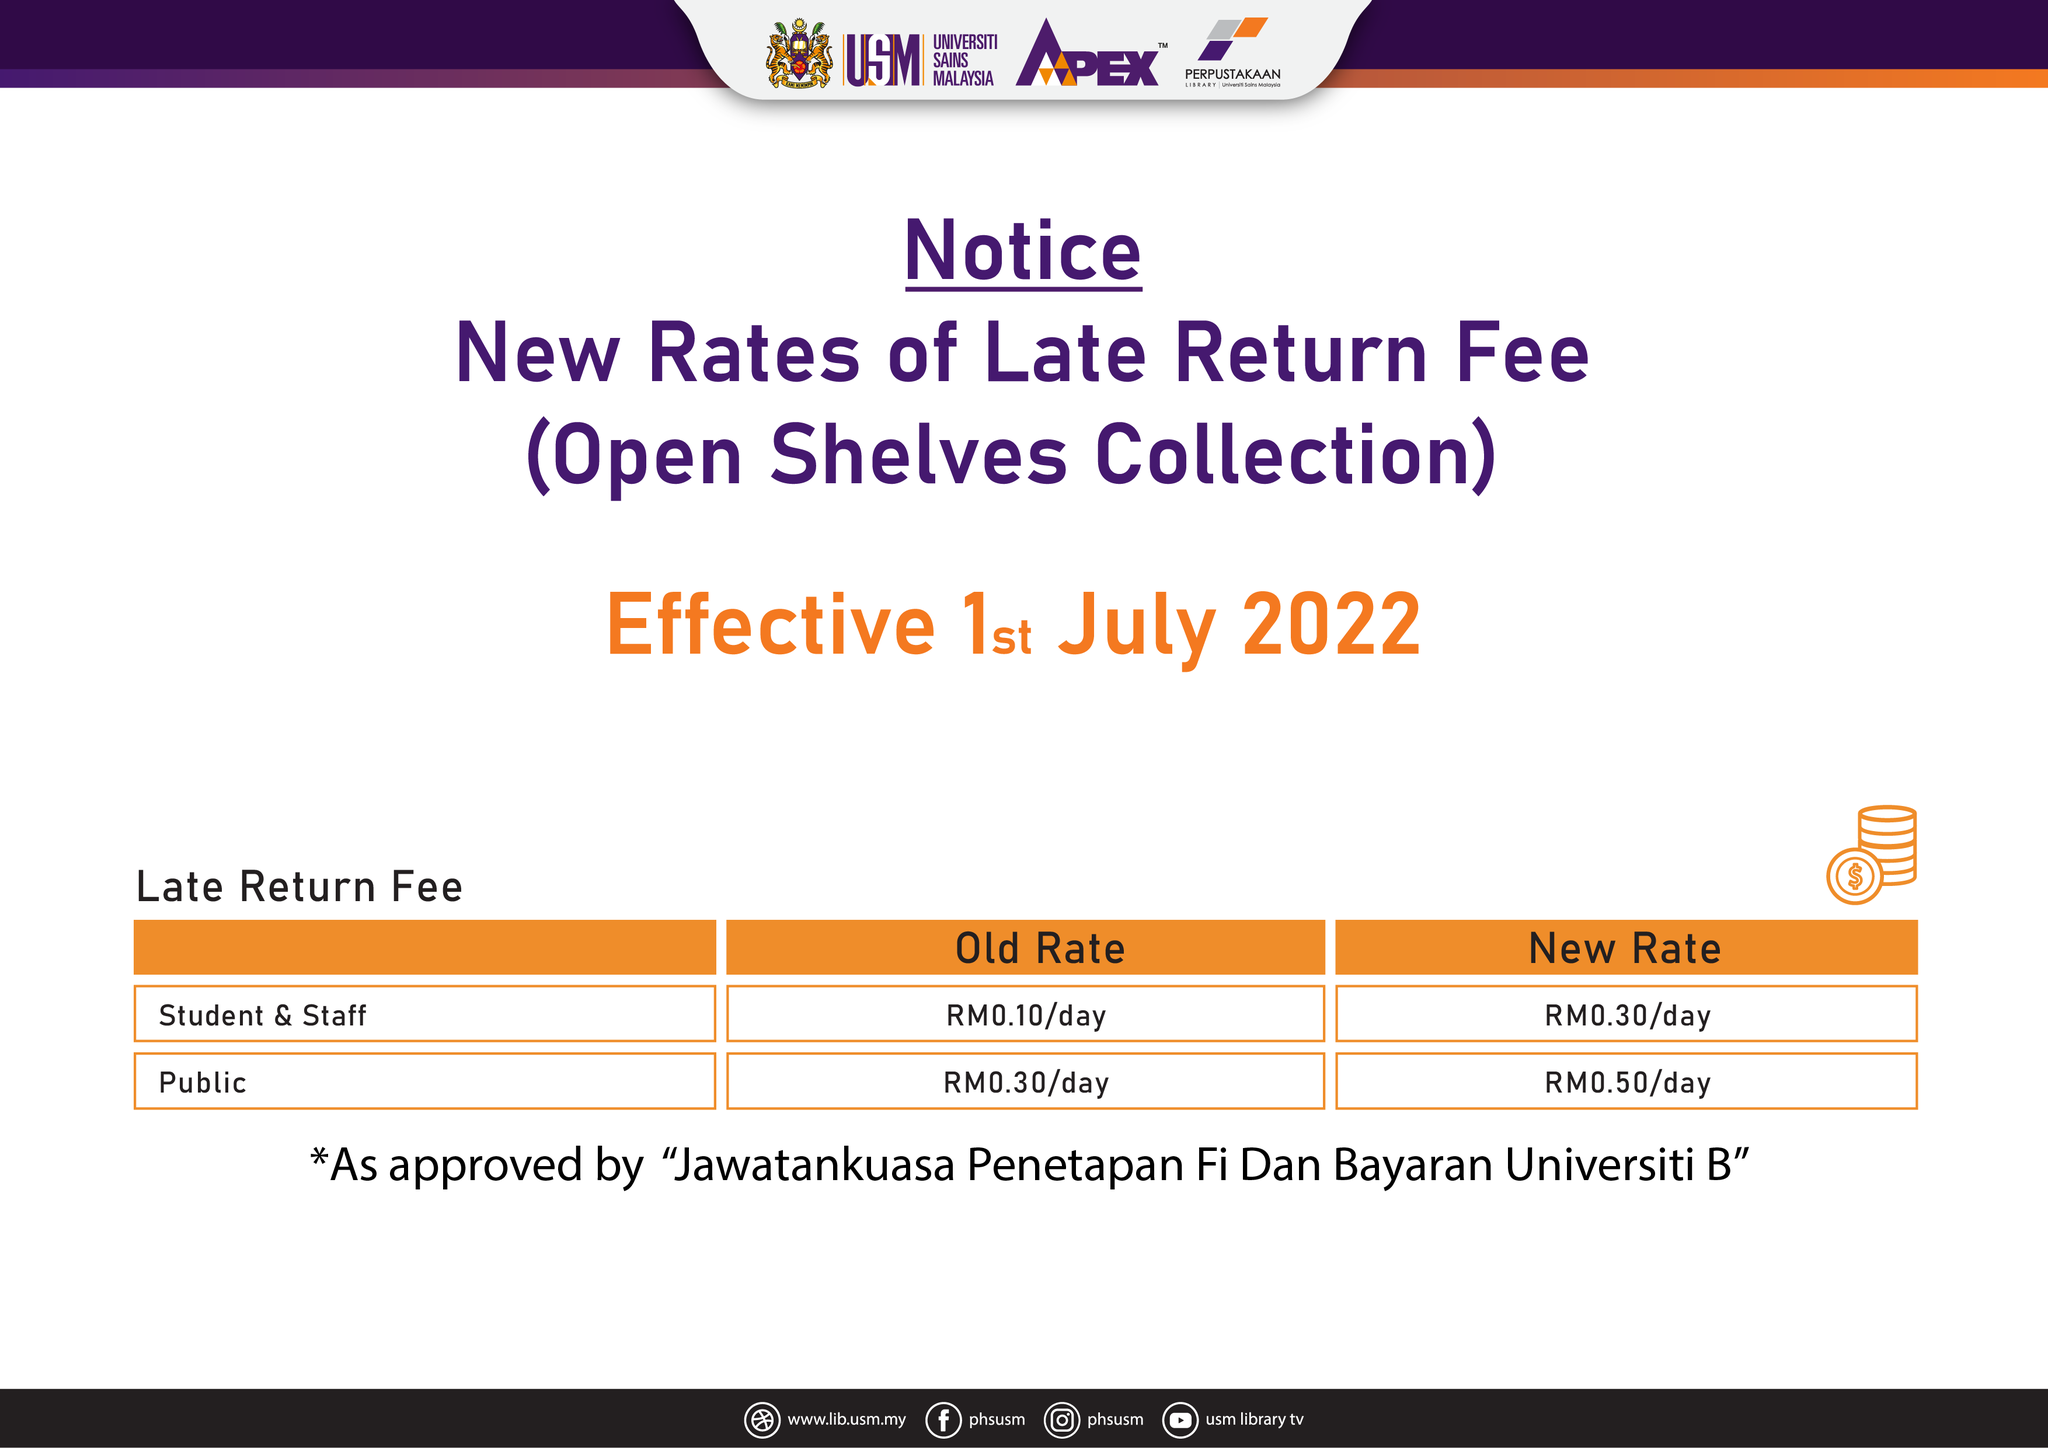 New rates of late return fee